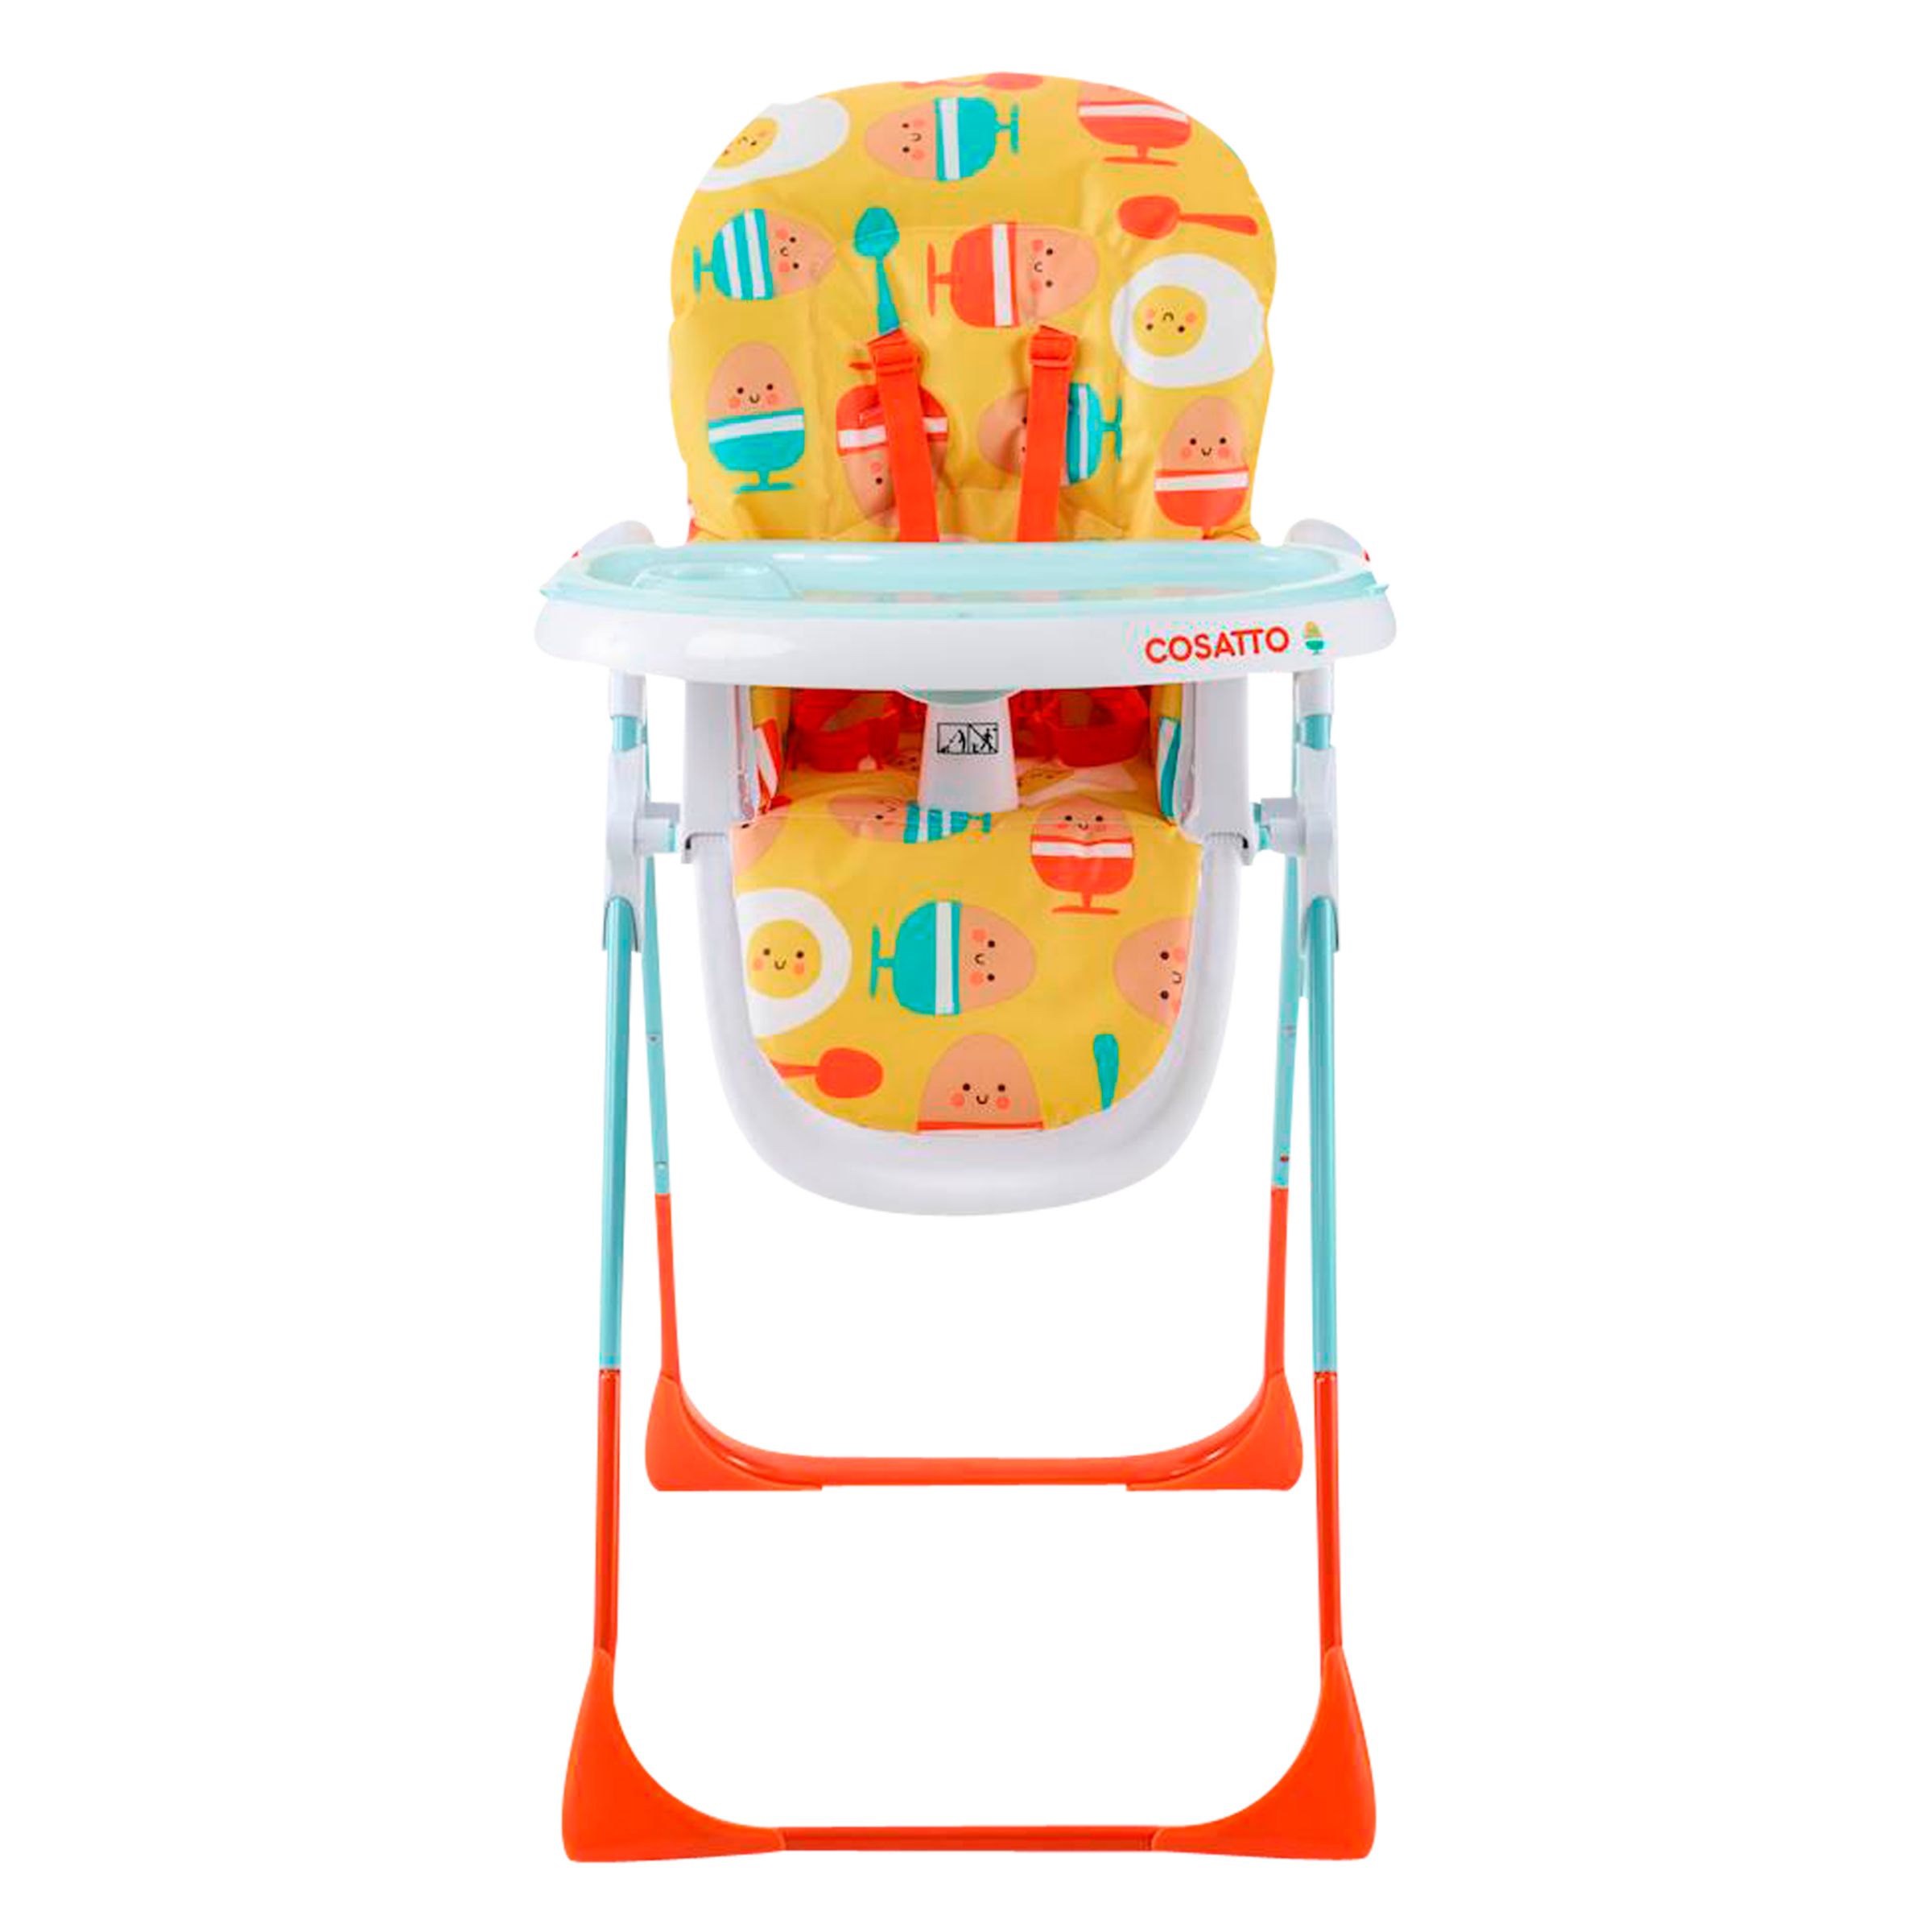 Cosatto Noodle Supa Highchair, Egg and Spoon